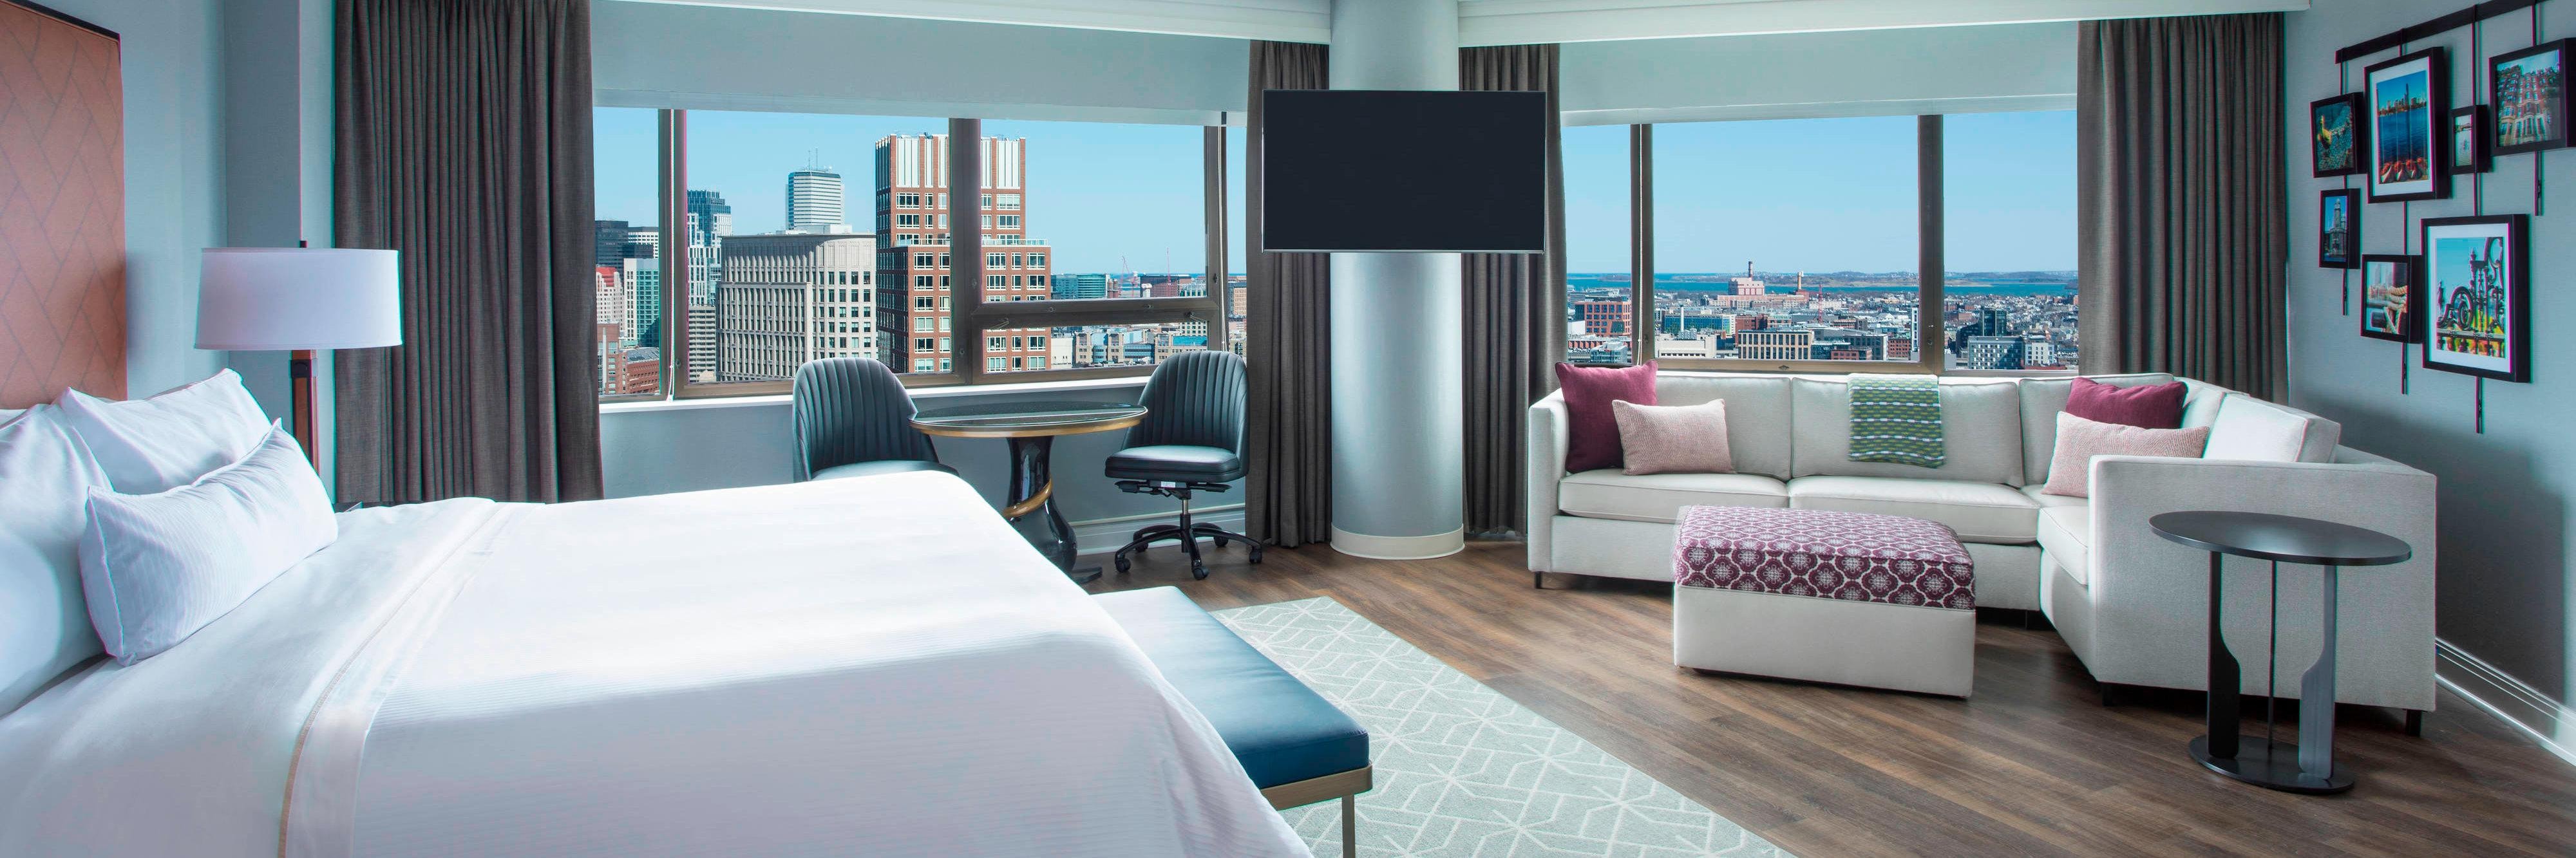 The Westin Copley Place, Boston Review: What To REALLY Expect If You Stay